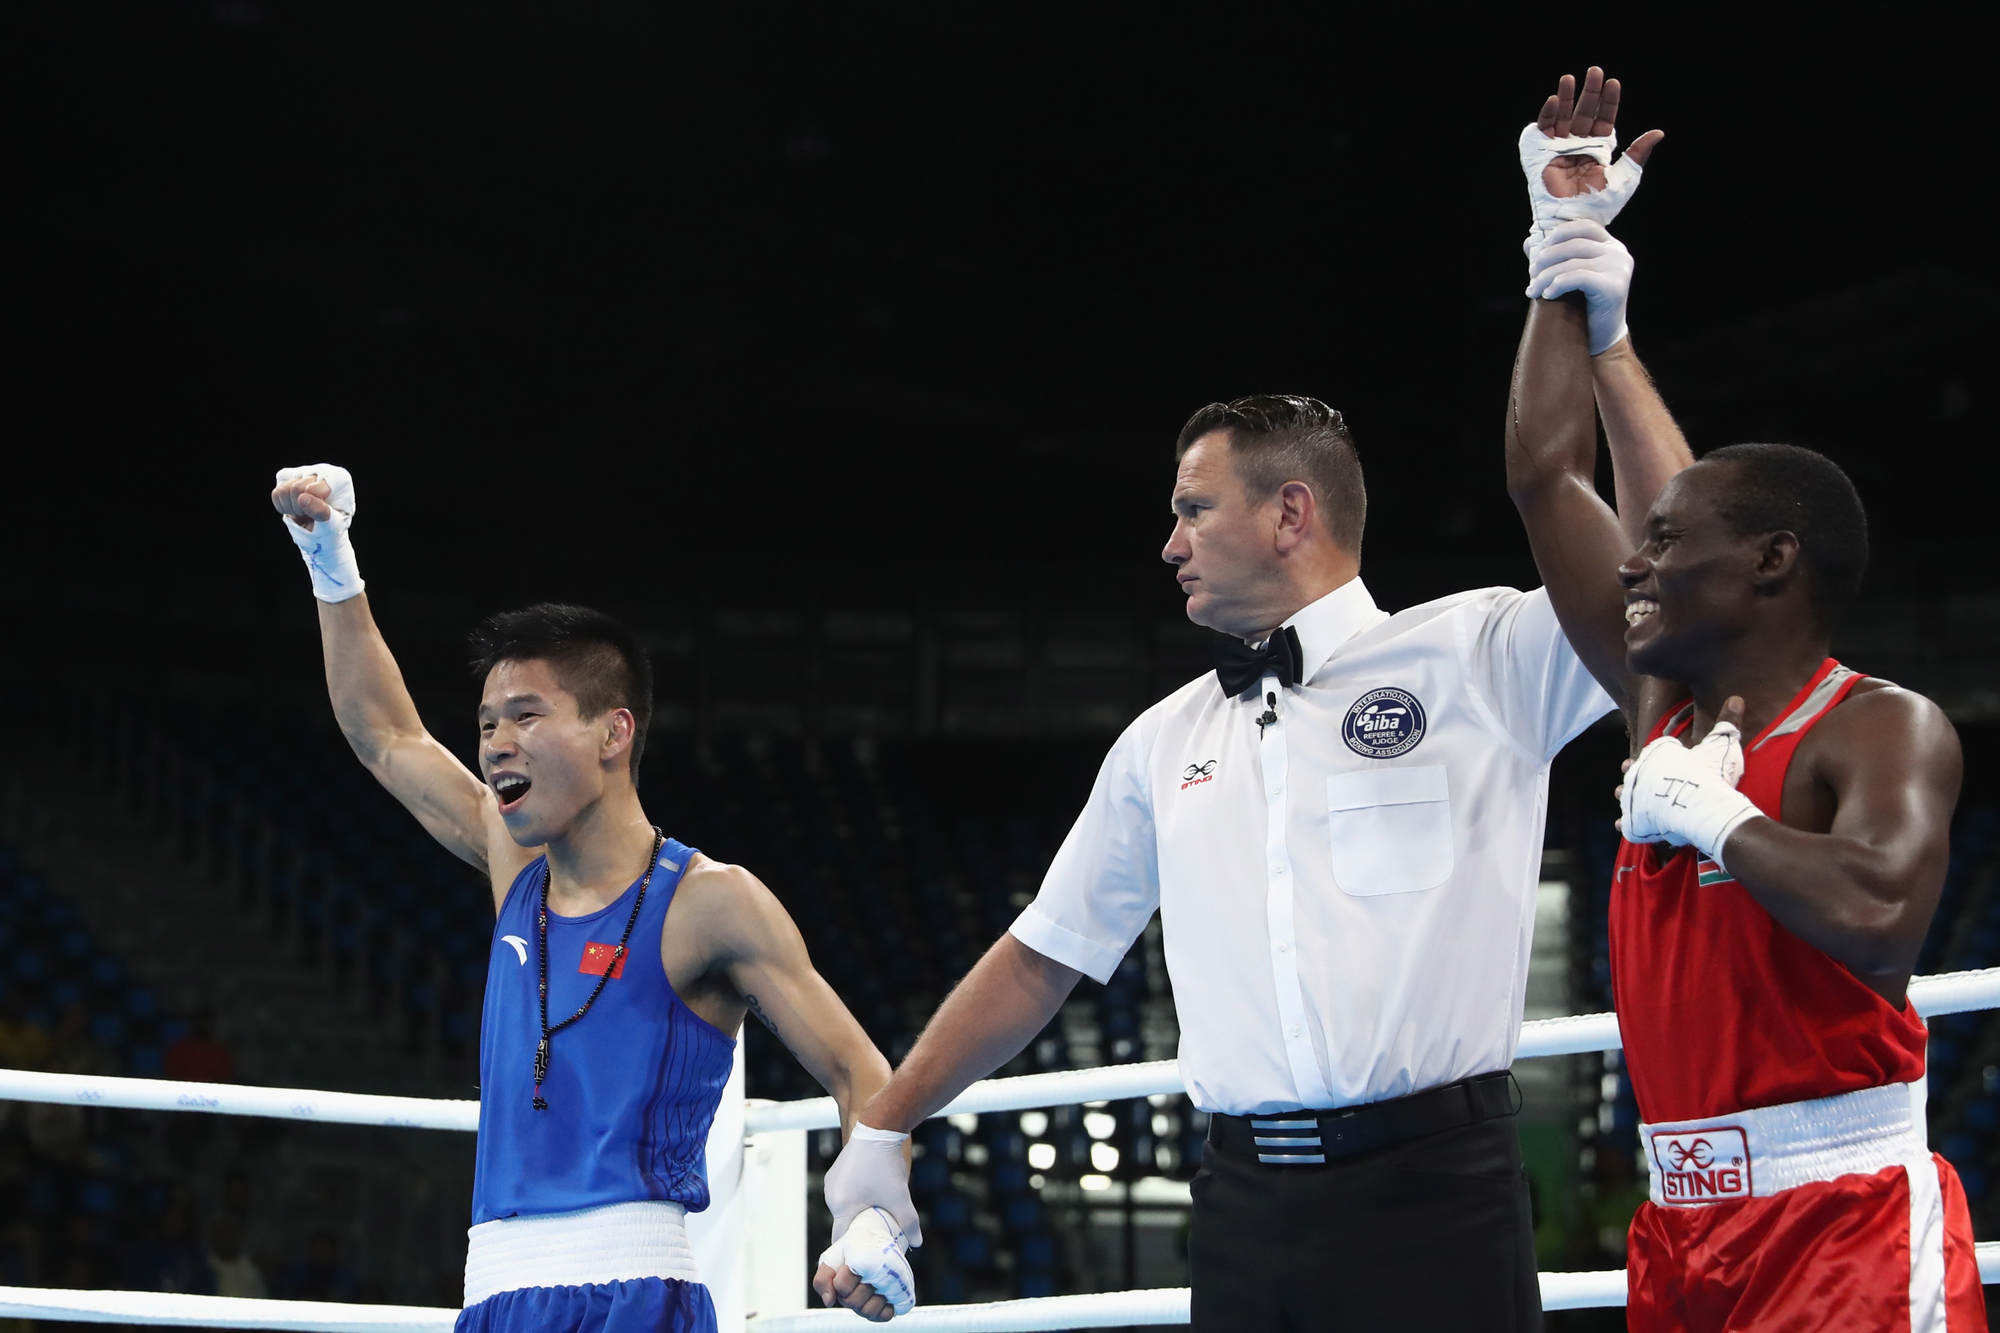 Lv Bin of China (L) and Peter Mungai Warui of Kenya (R) are awarded the decision in their Mens 46-49 Light Fly Weight bout on Day 3 of the Rio 2016 Olympic Games at the Riocentro - Pavilion 6 on August 8, 2016 in Rio de Janeiro, Brazil. (Photo by Phil Walter/Getty Images, via VCG)